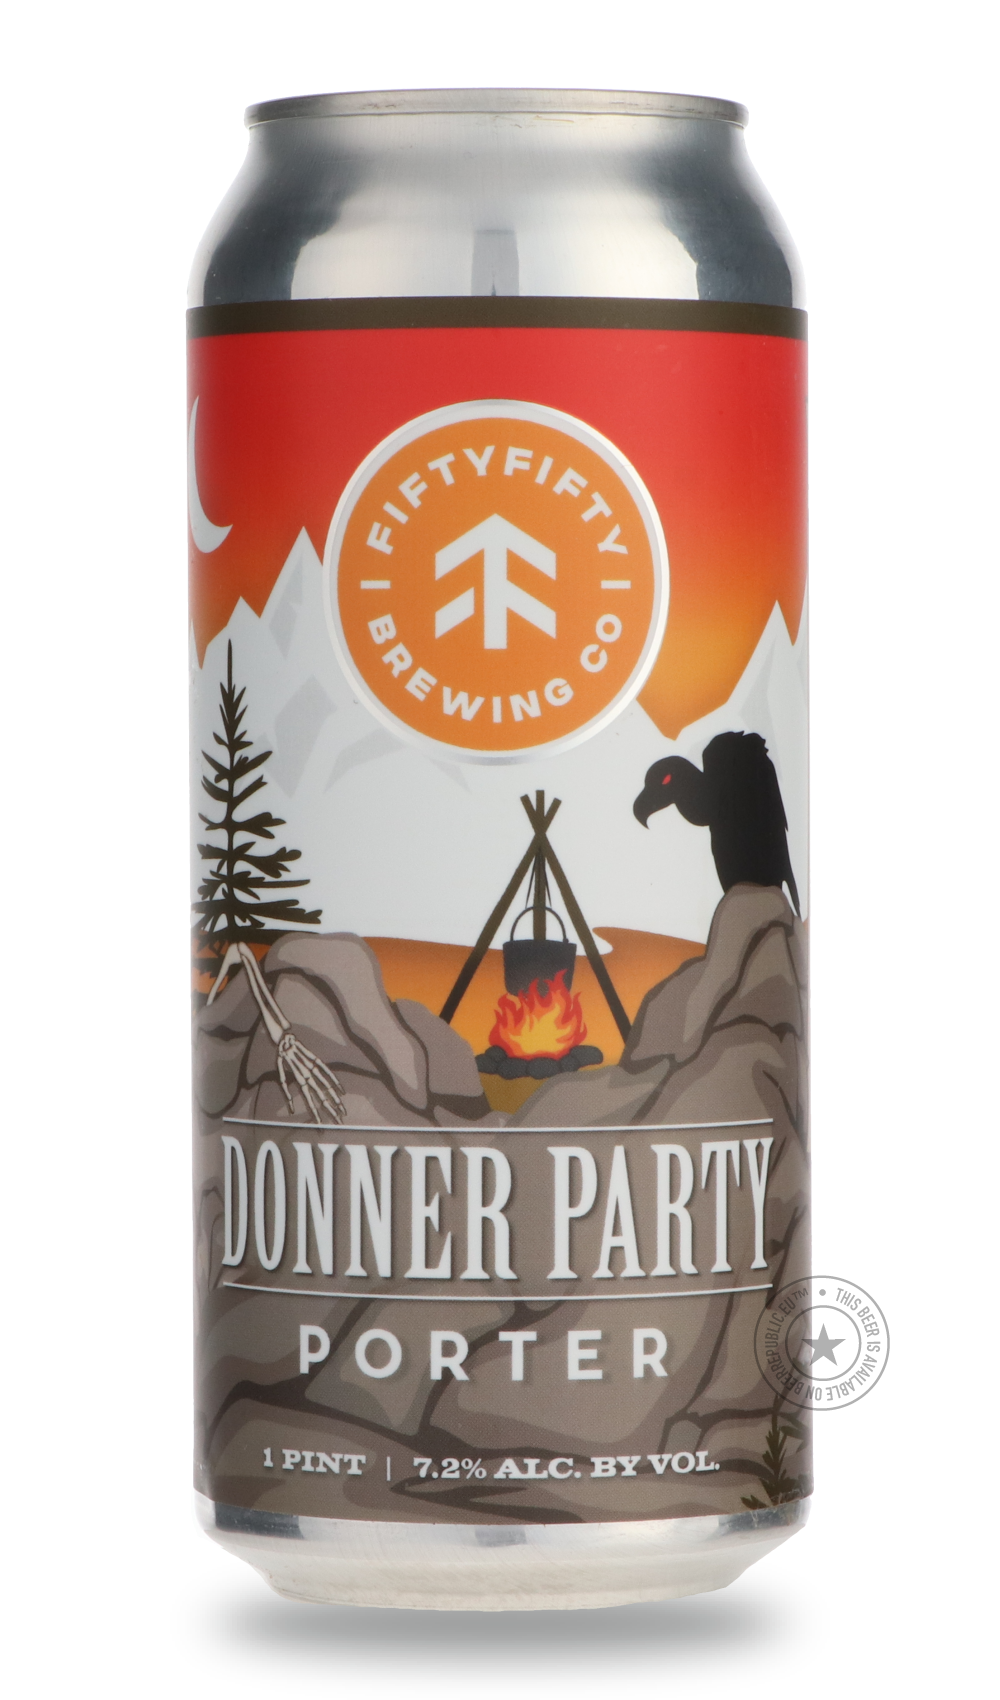 -FiftyFifty- Donner Party Porter-Stout & Porter- Only @ Beer Republic - The best online beer store for American & Canadian craft beer - Buy beer online from the USA and Canada - Bier online kopen - Amerikaans bier kopen - Craft beer store - Craft beer kopen - Amerikanisch bier kaufen - Bier online kaufen - Acheter biere online - IPA - Stout - Porter - New England IPA - Hazy IPA - Imperial Stout - Barrel Aged - Barrel Aged Imperial Stout - Brown - Dark beer - Blond - Blonde - Pilsner - Lager - Wheat - Weizen